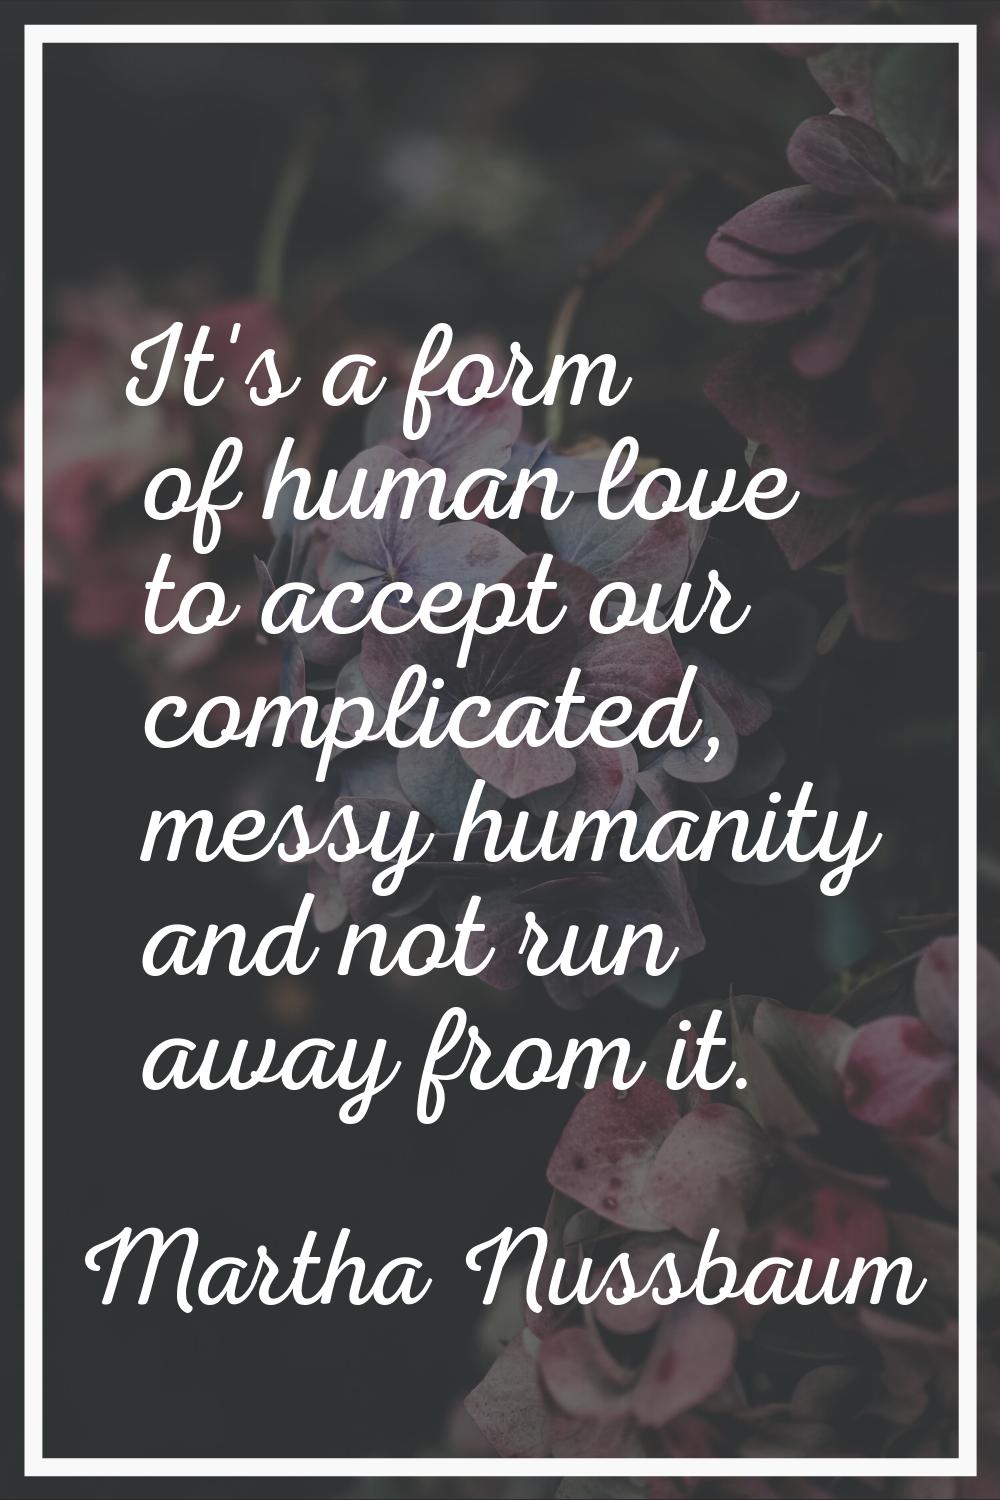 It's a form of human love to accept our complicated, messy humanity and not run away from it.